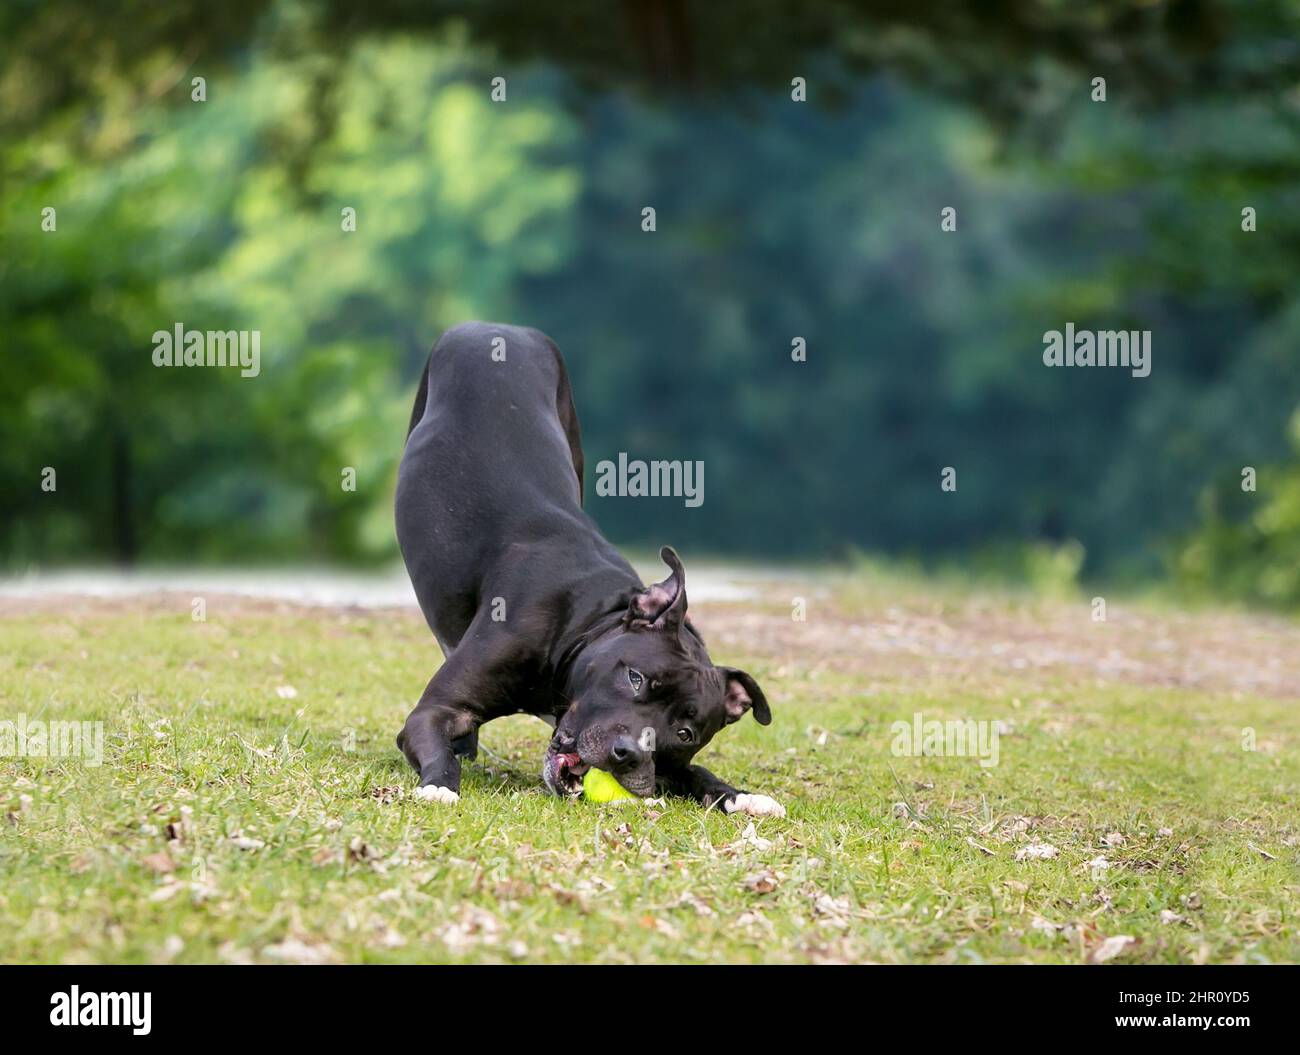 A black Pit Bull Terrier mixed breed dog chewing on a ball in a play bow position Stock Photo